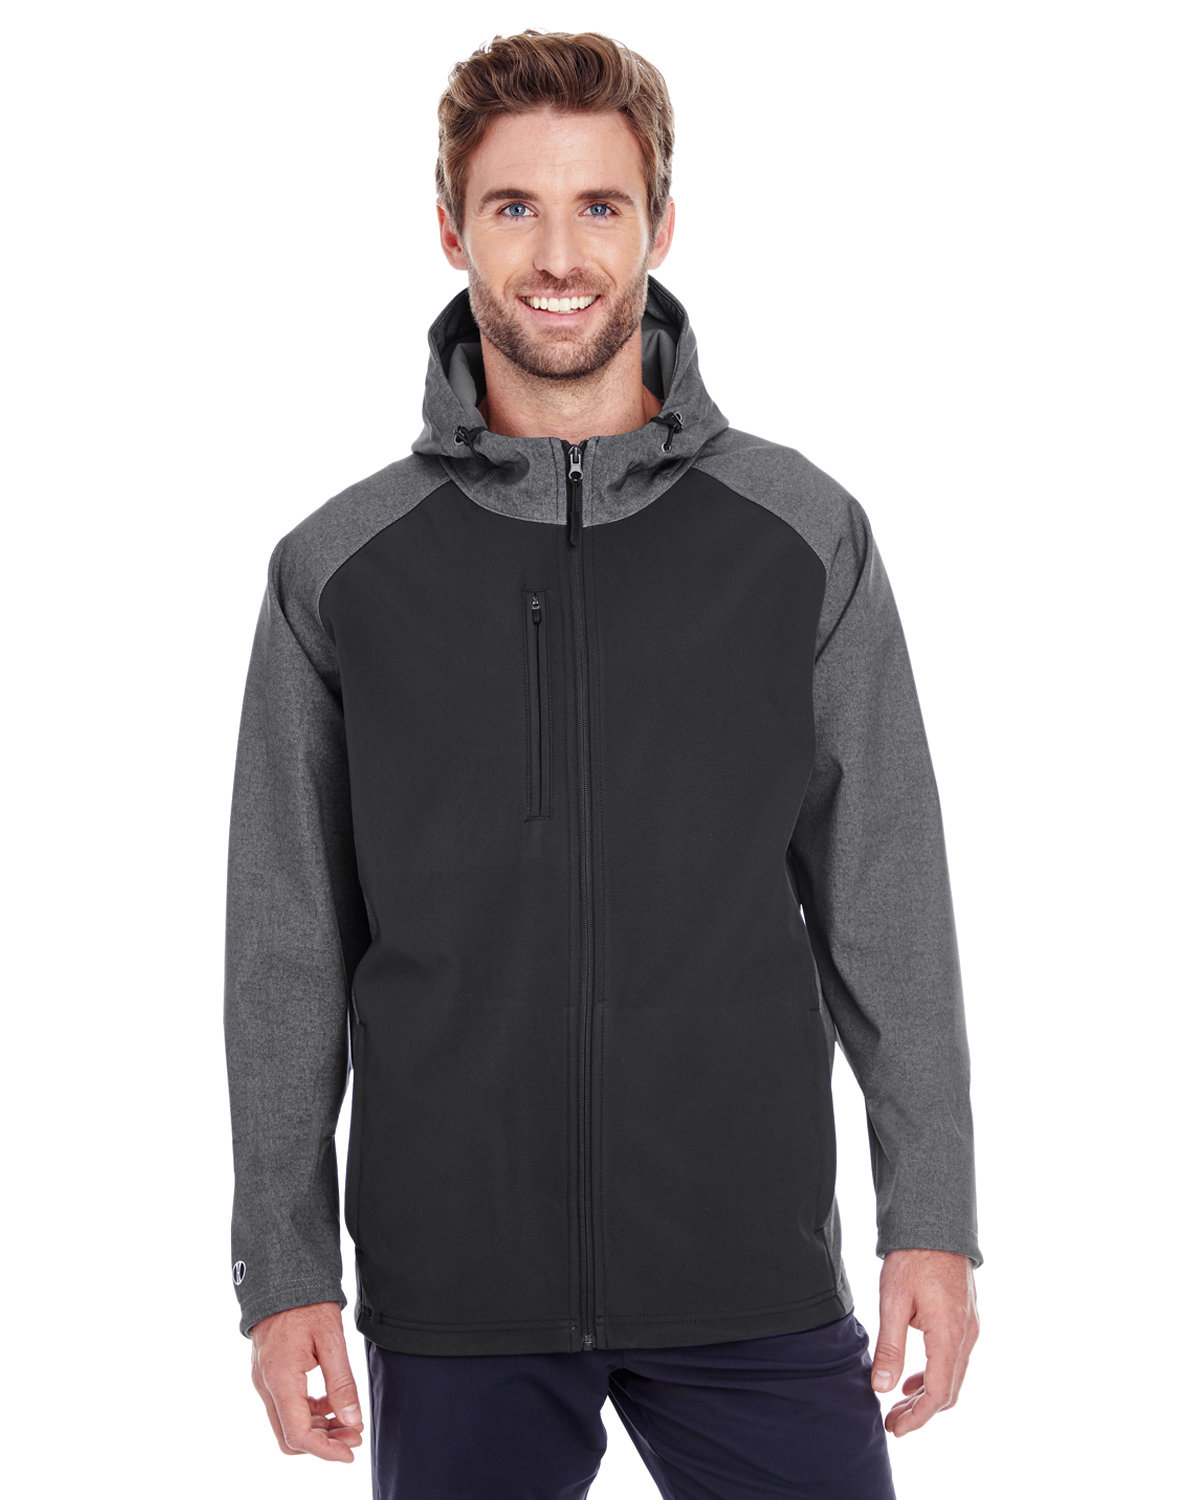 Front view of Men’s Raider Soft Shell Jacket